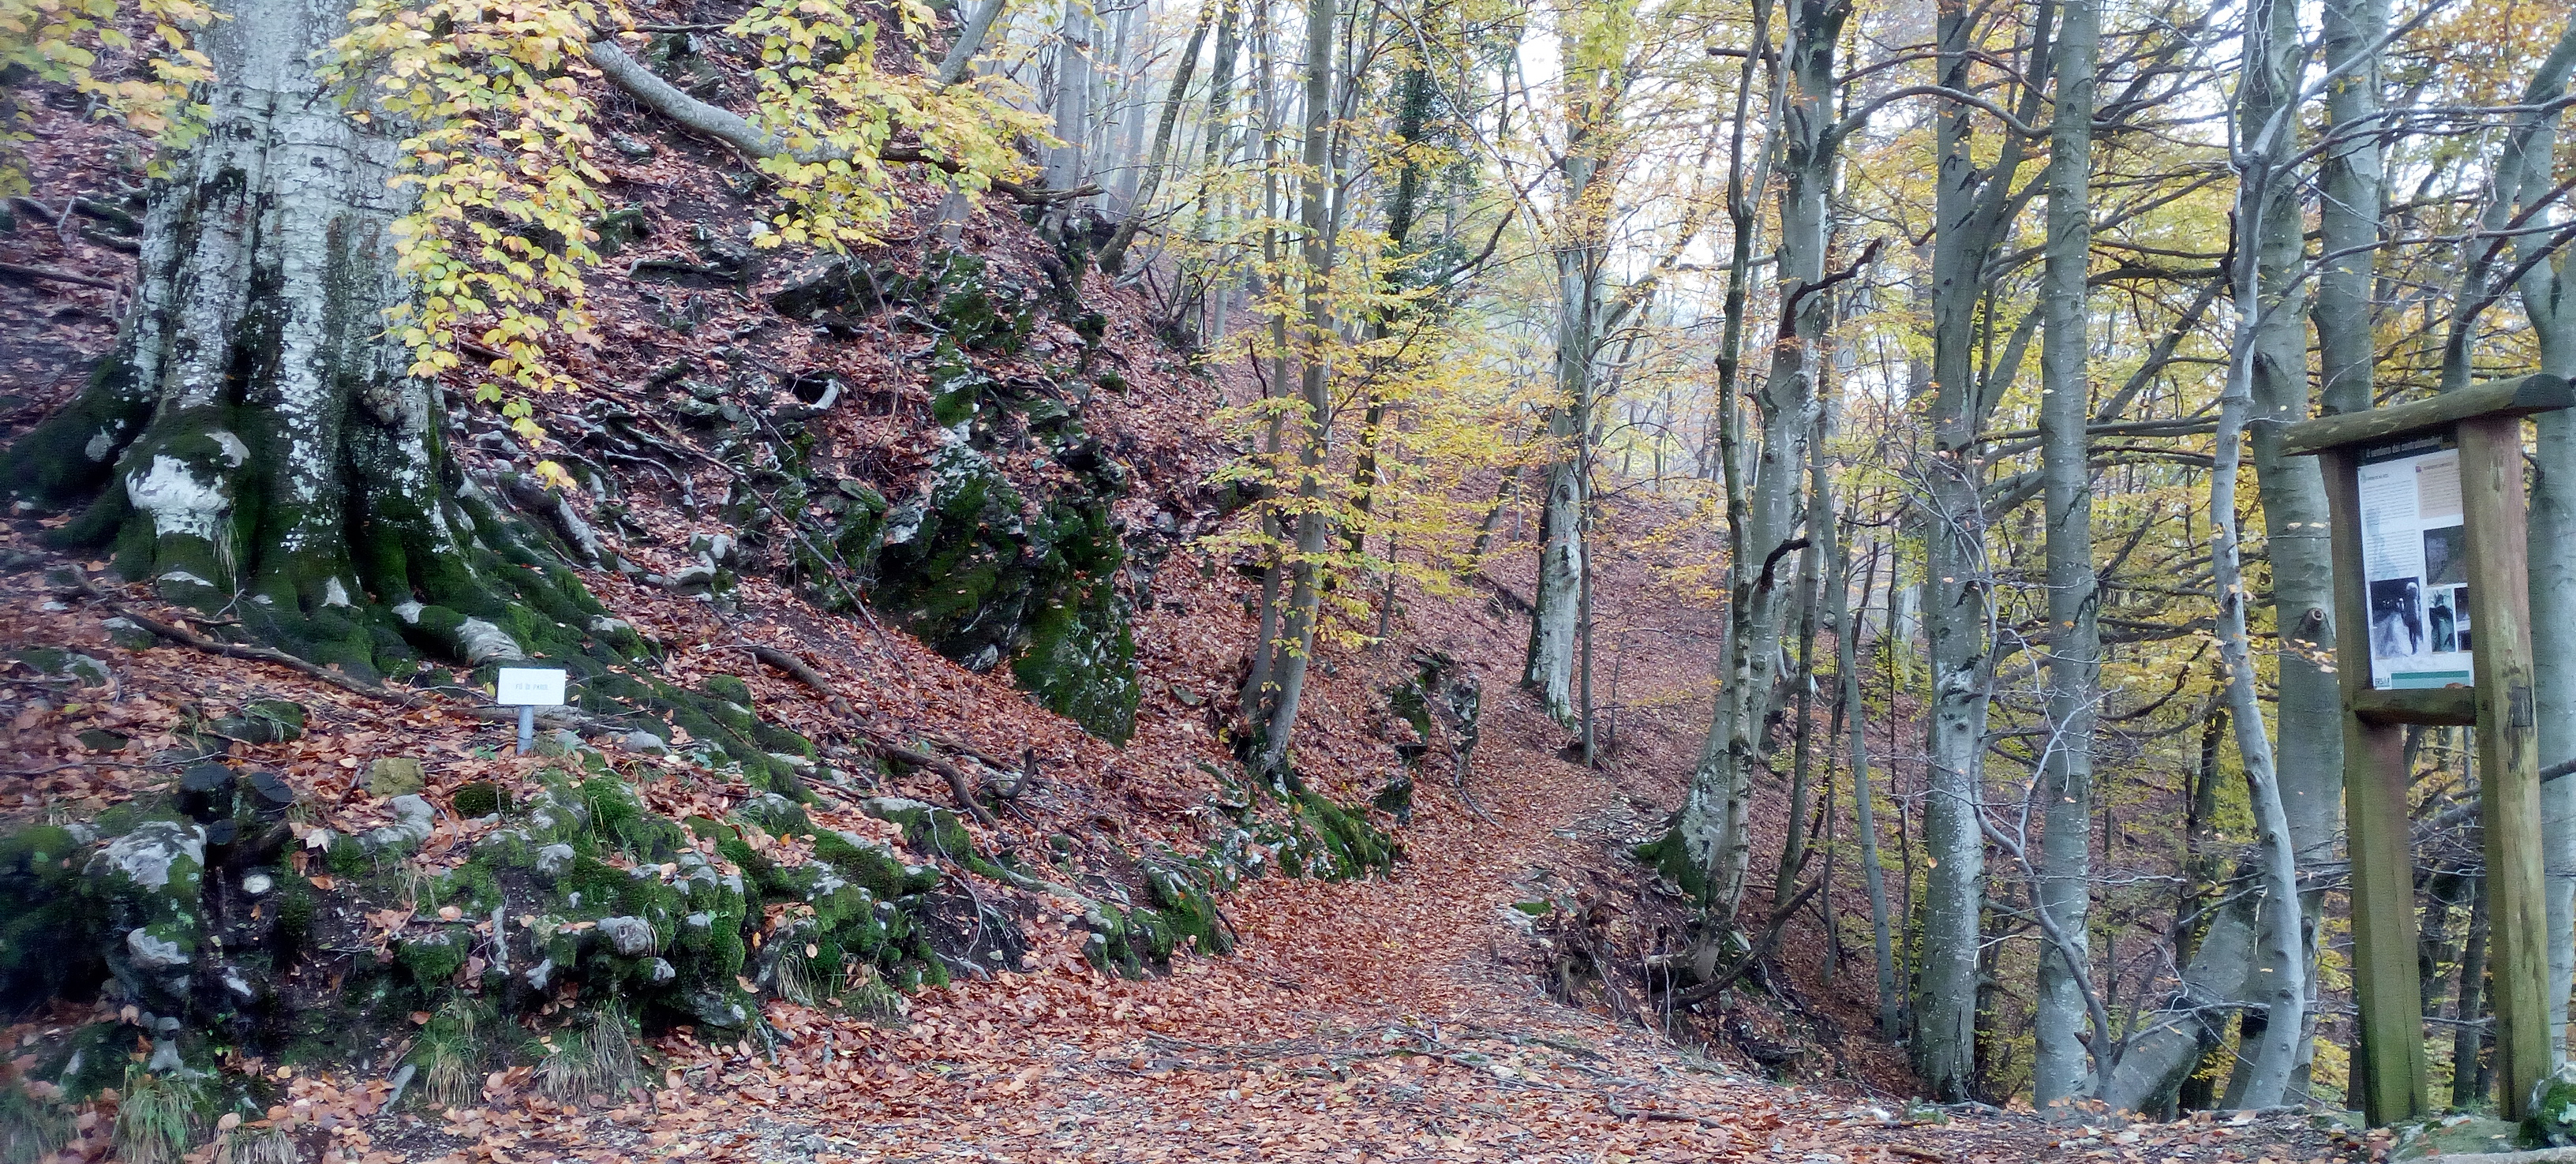 trail opening into an autumn forest with a trail signpost on the right